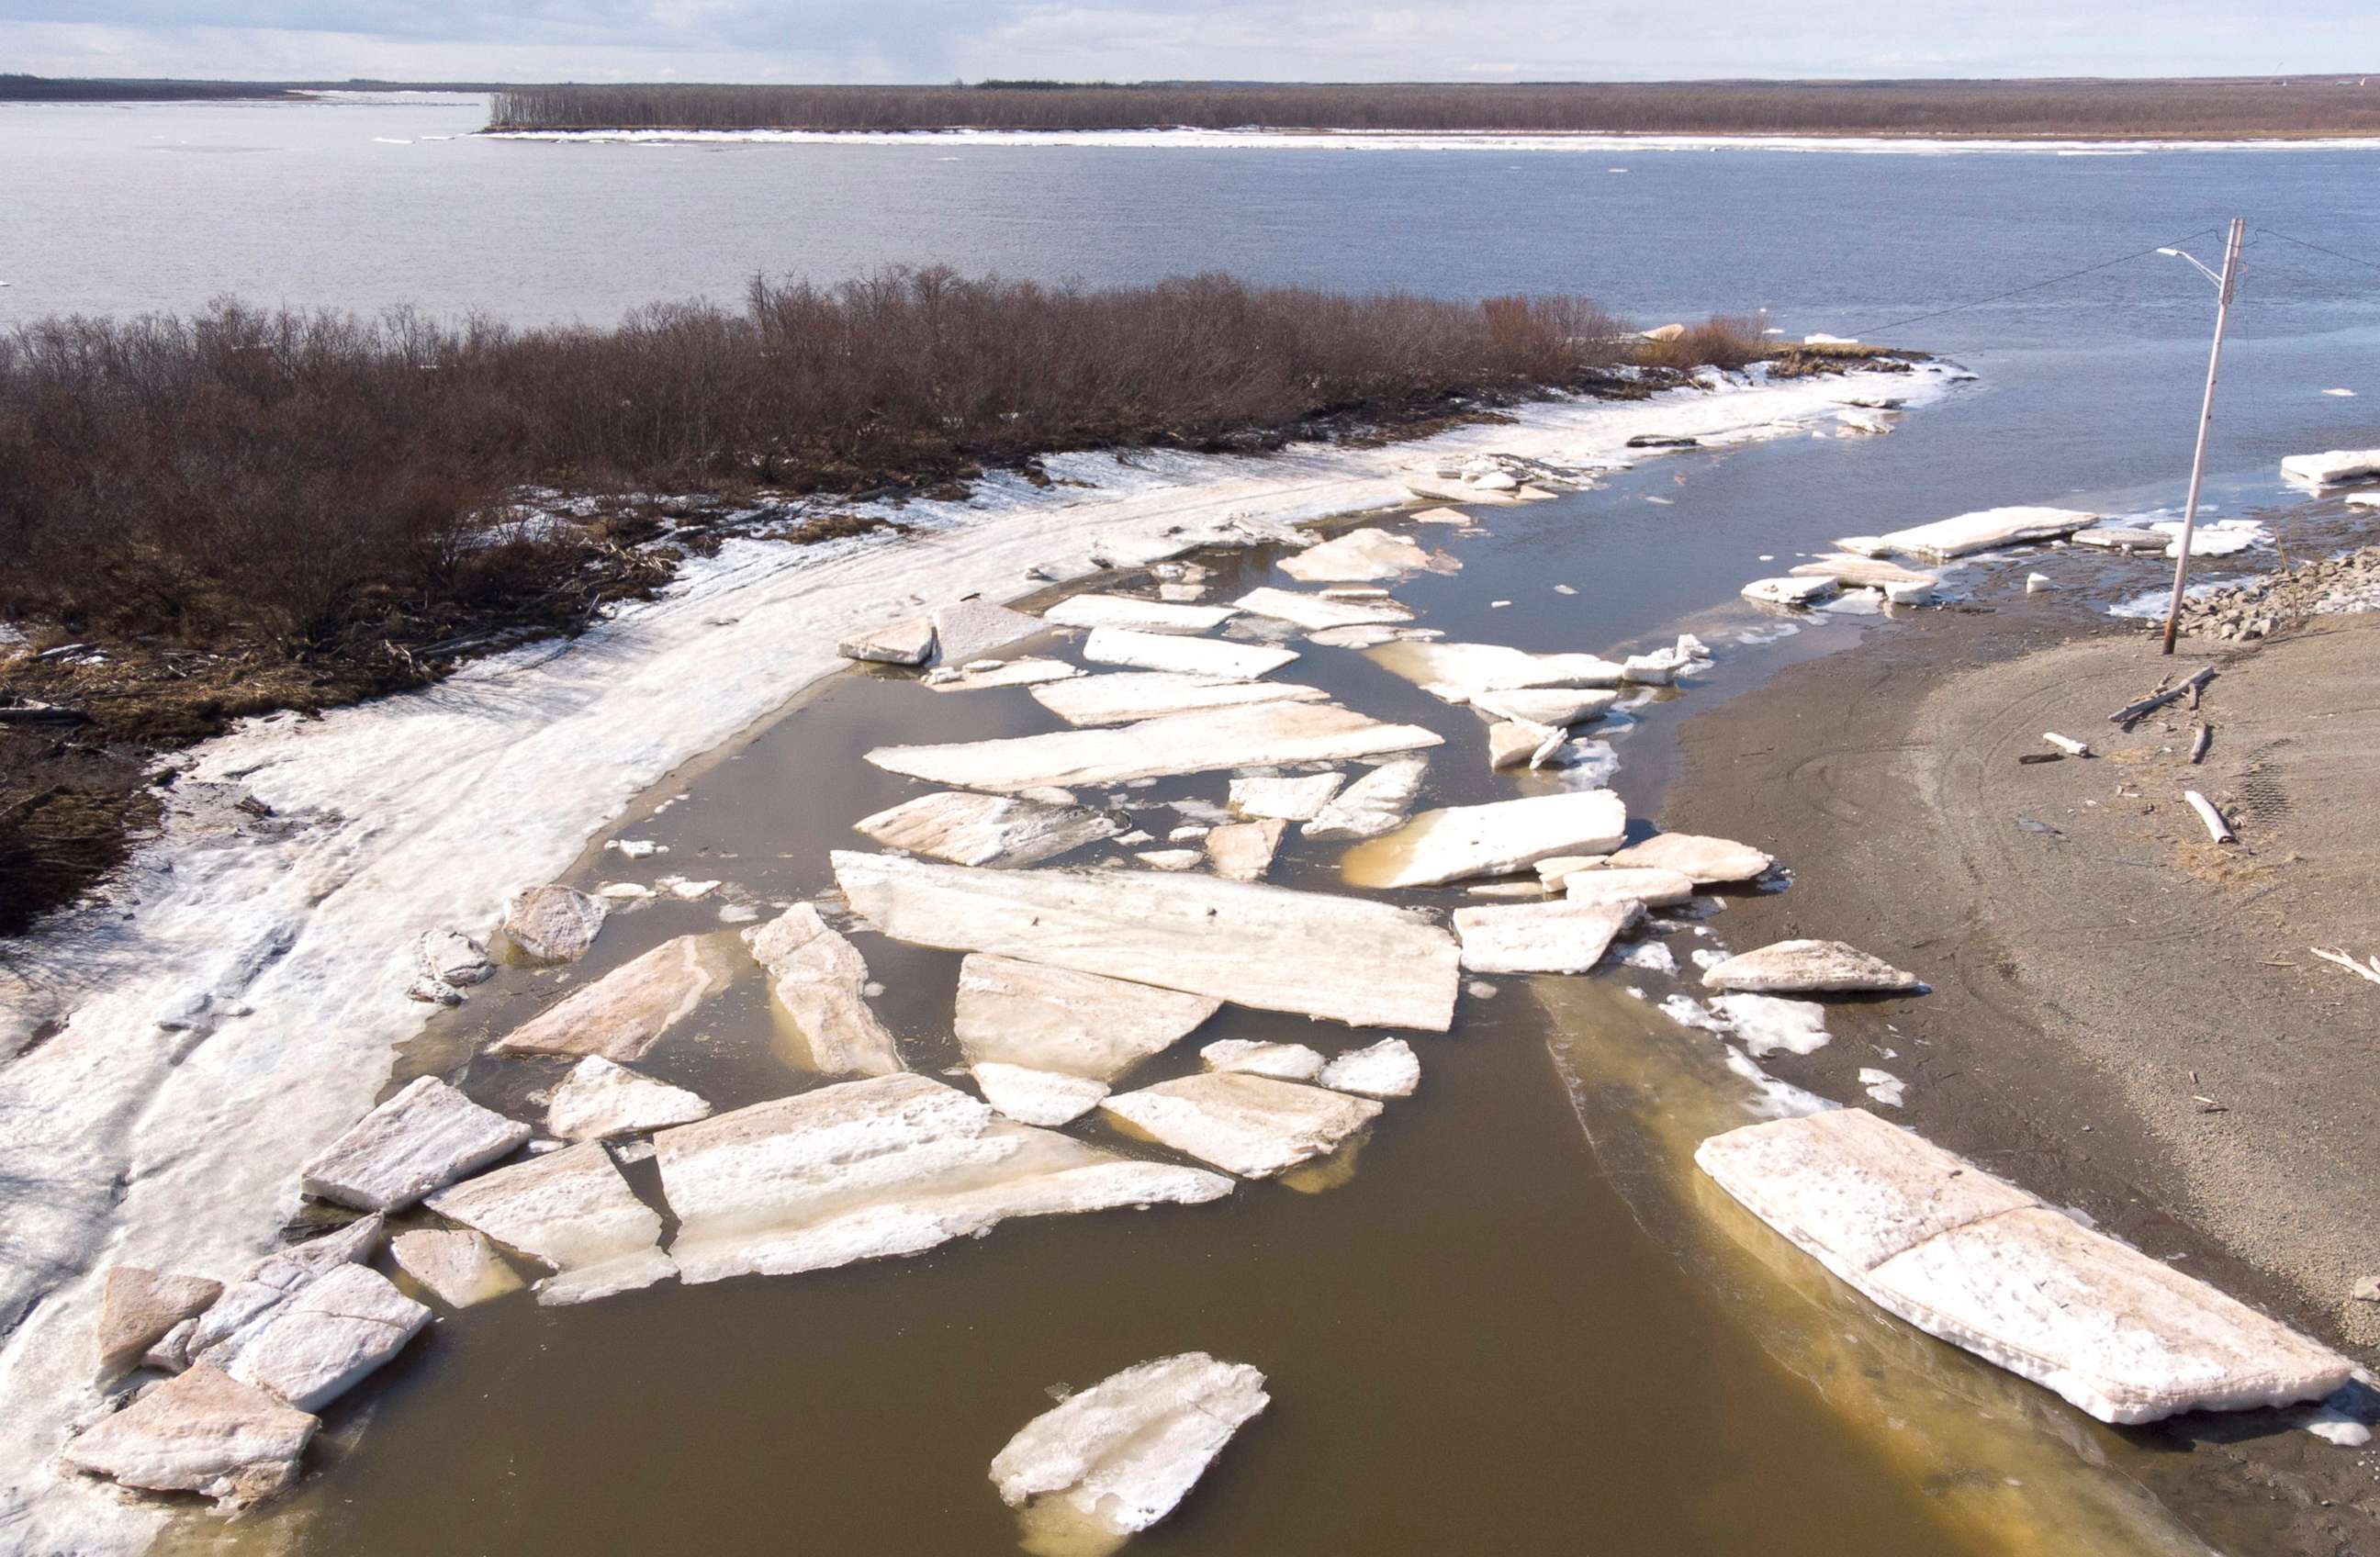 PHOTO: Melting ice beside severe erosion of the permafrost tundra at Bethel on the Yukon Delta in Alaska, April 15, 2019. Alaska has been warming twice as fast as the global average, with temperatures in February and March shattering records.